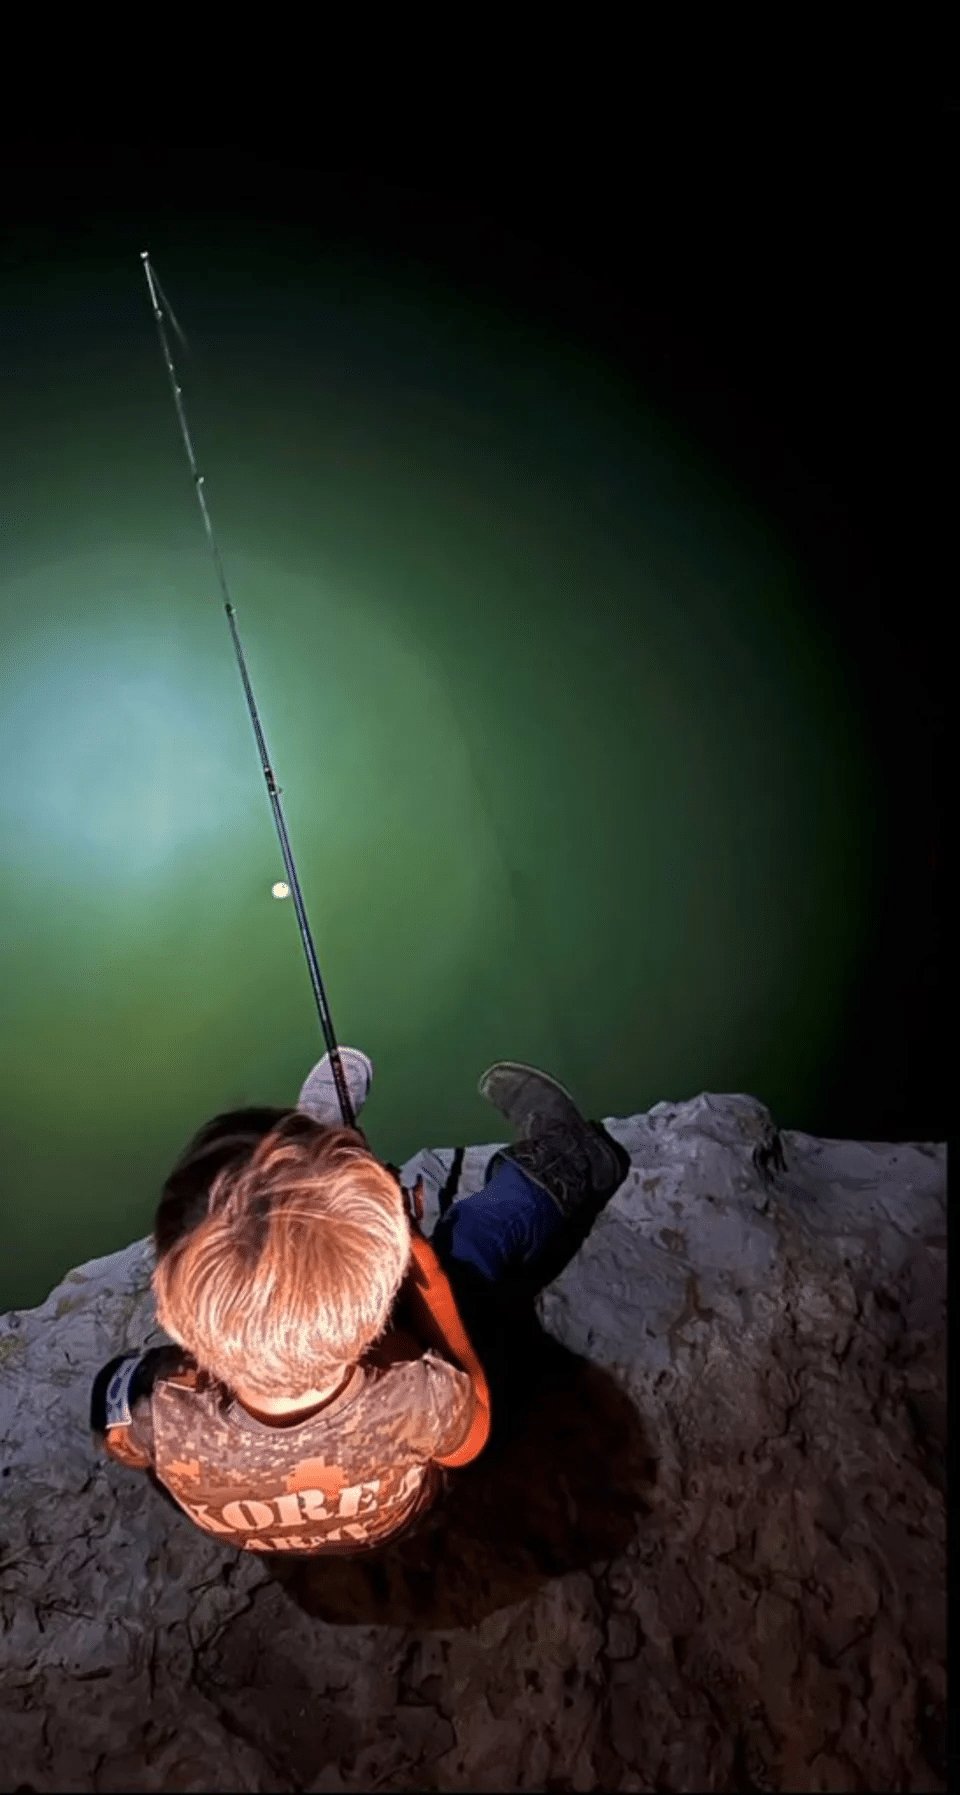 Crew Gaines turns goes fishing on his 5th birthday.